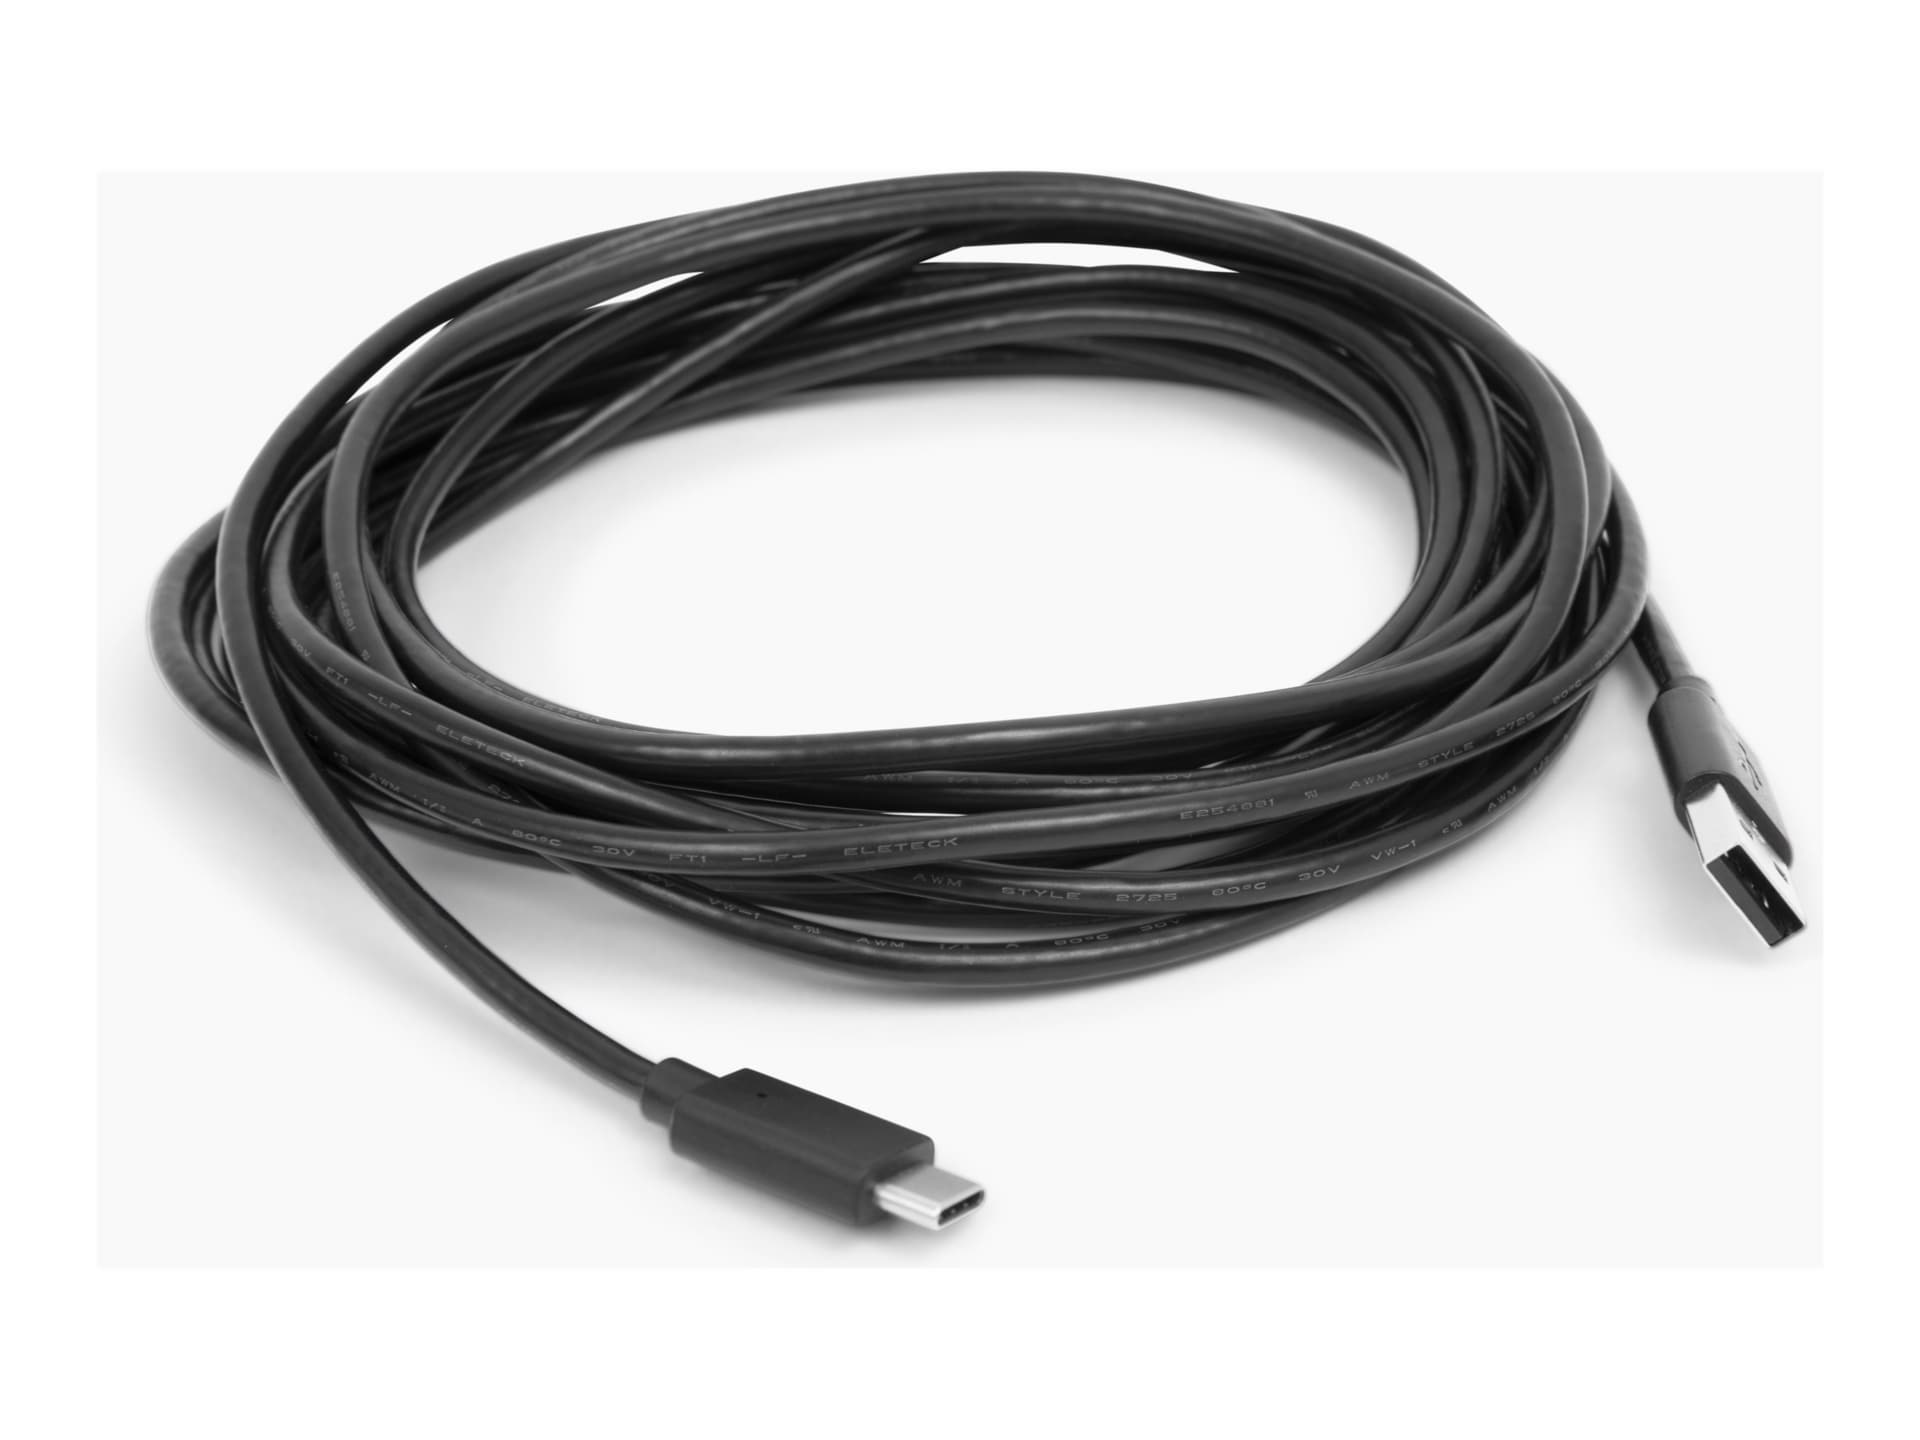 Owl Labs - USB-C cable - 24 pin USB-C to USB - 16.4 ft